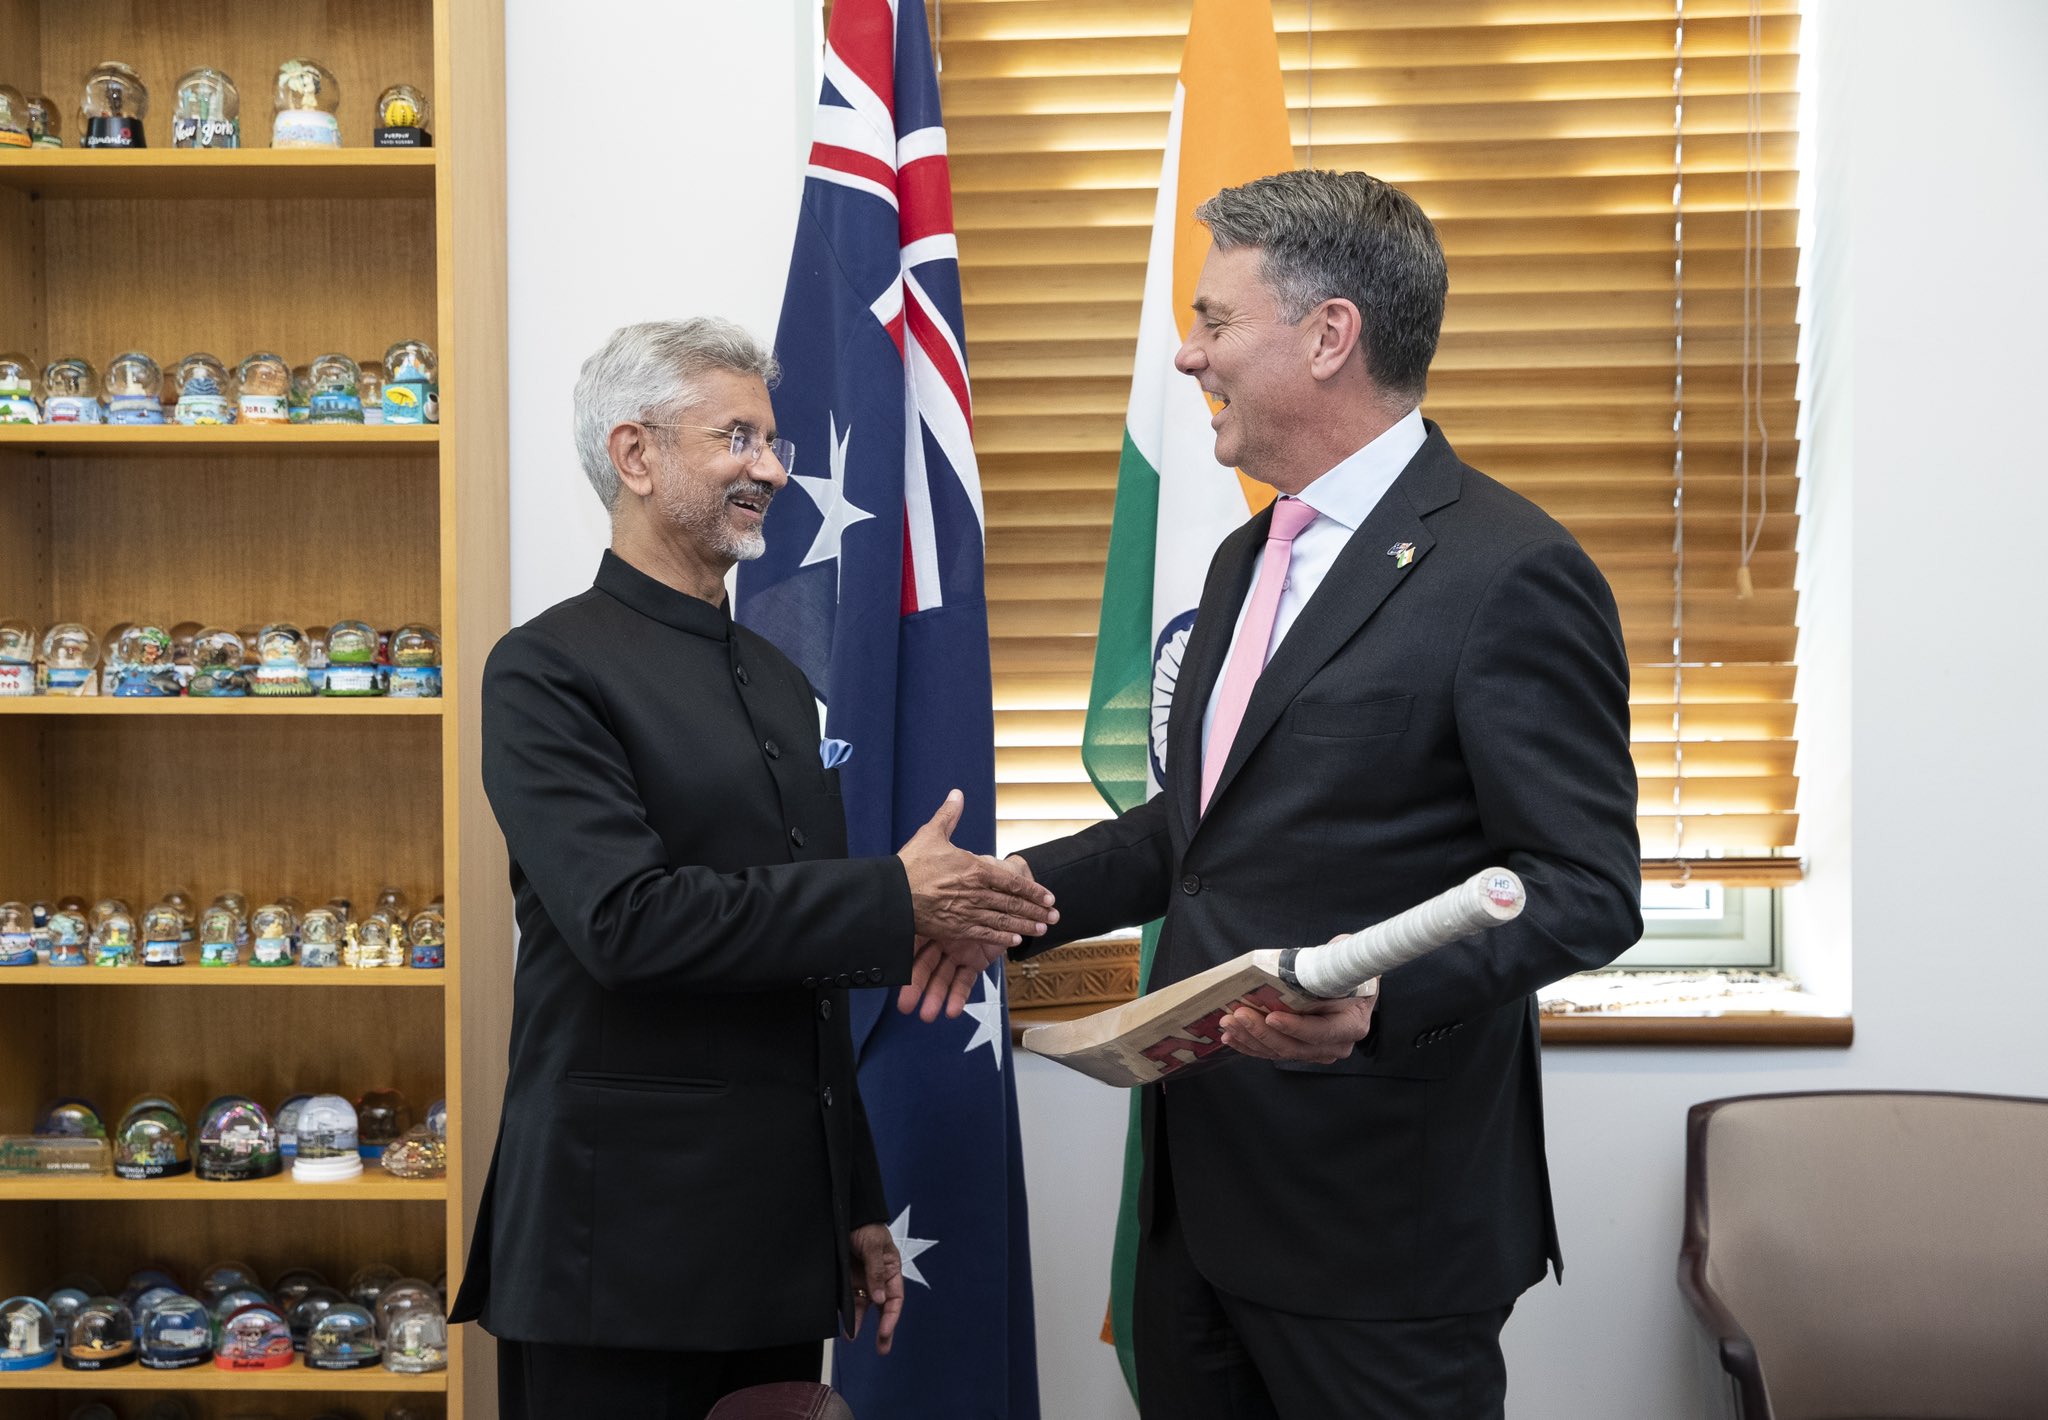 Indian External Affairs Minister S. Jaishankar (L) and Australian Defence Minsiter Richard Marles agreed that the two countries’ “growing defence and security cooperation” ensures “a peaceful, prosperous and rules-based Indo-Pacific.”